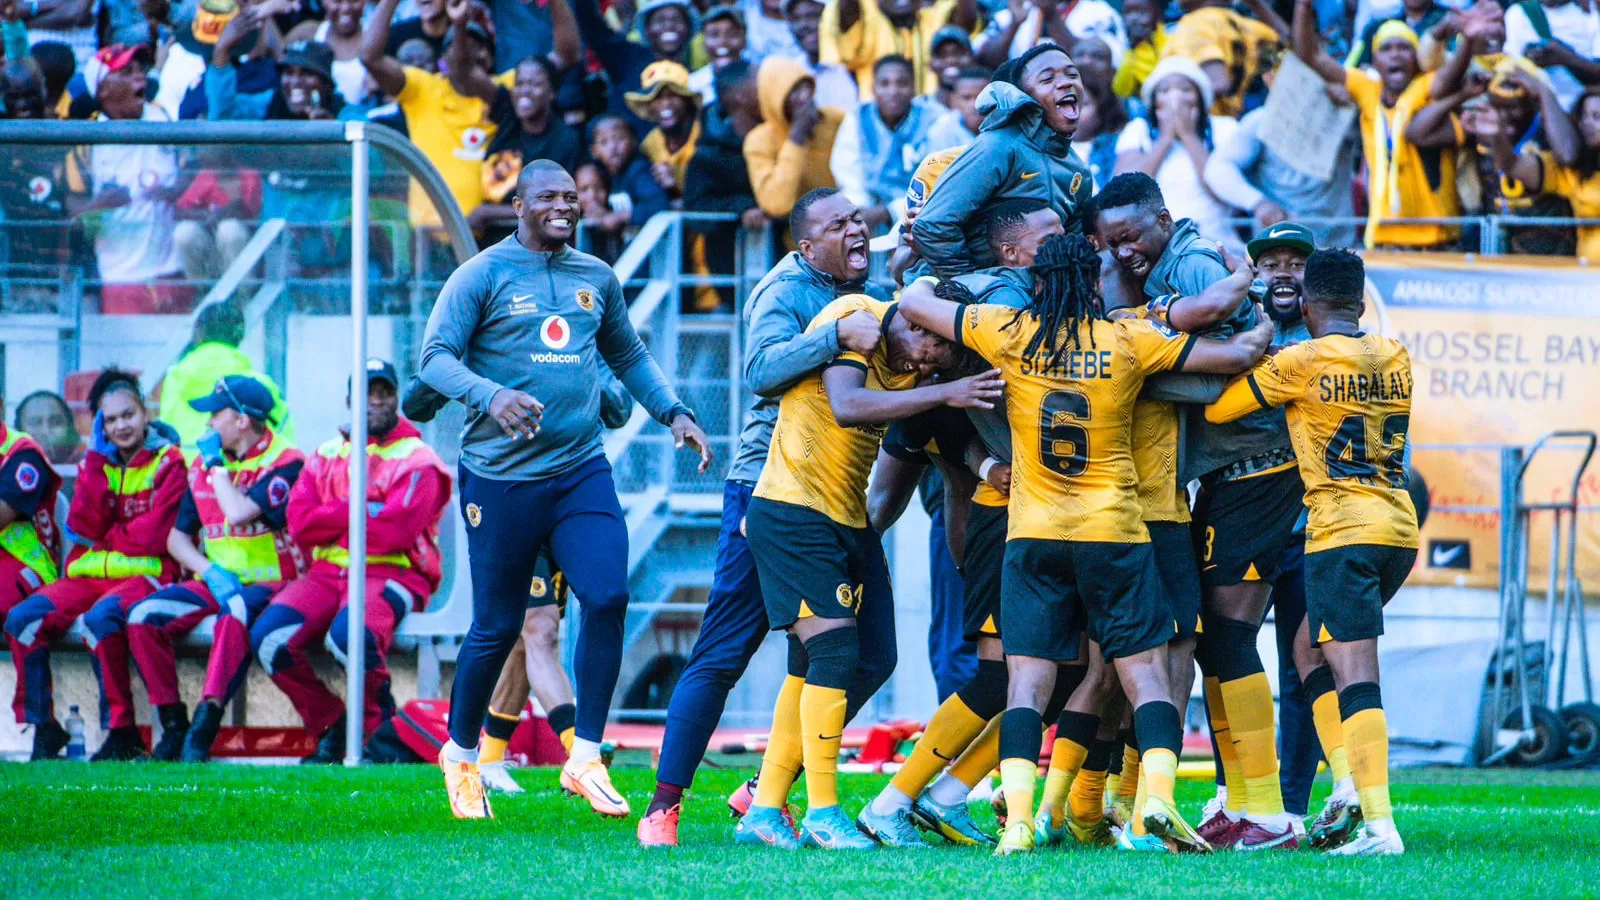 Itumeleng Khune celebrating a goal with his teammates recently